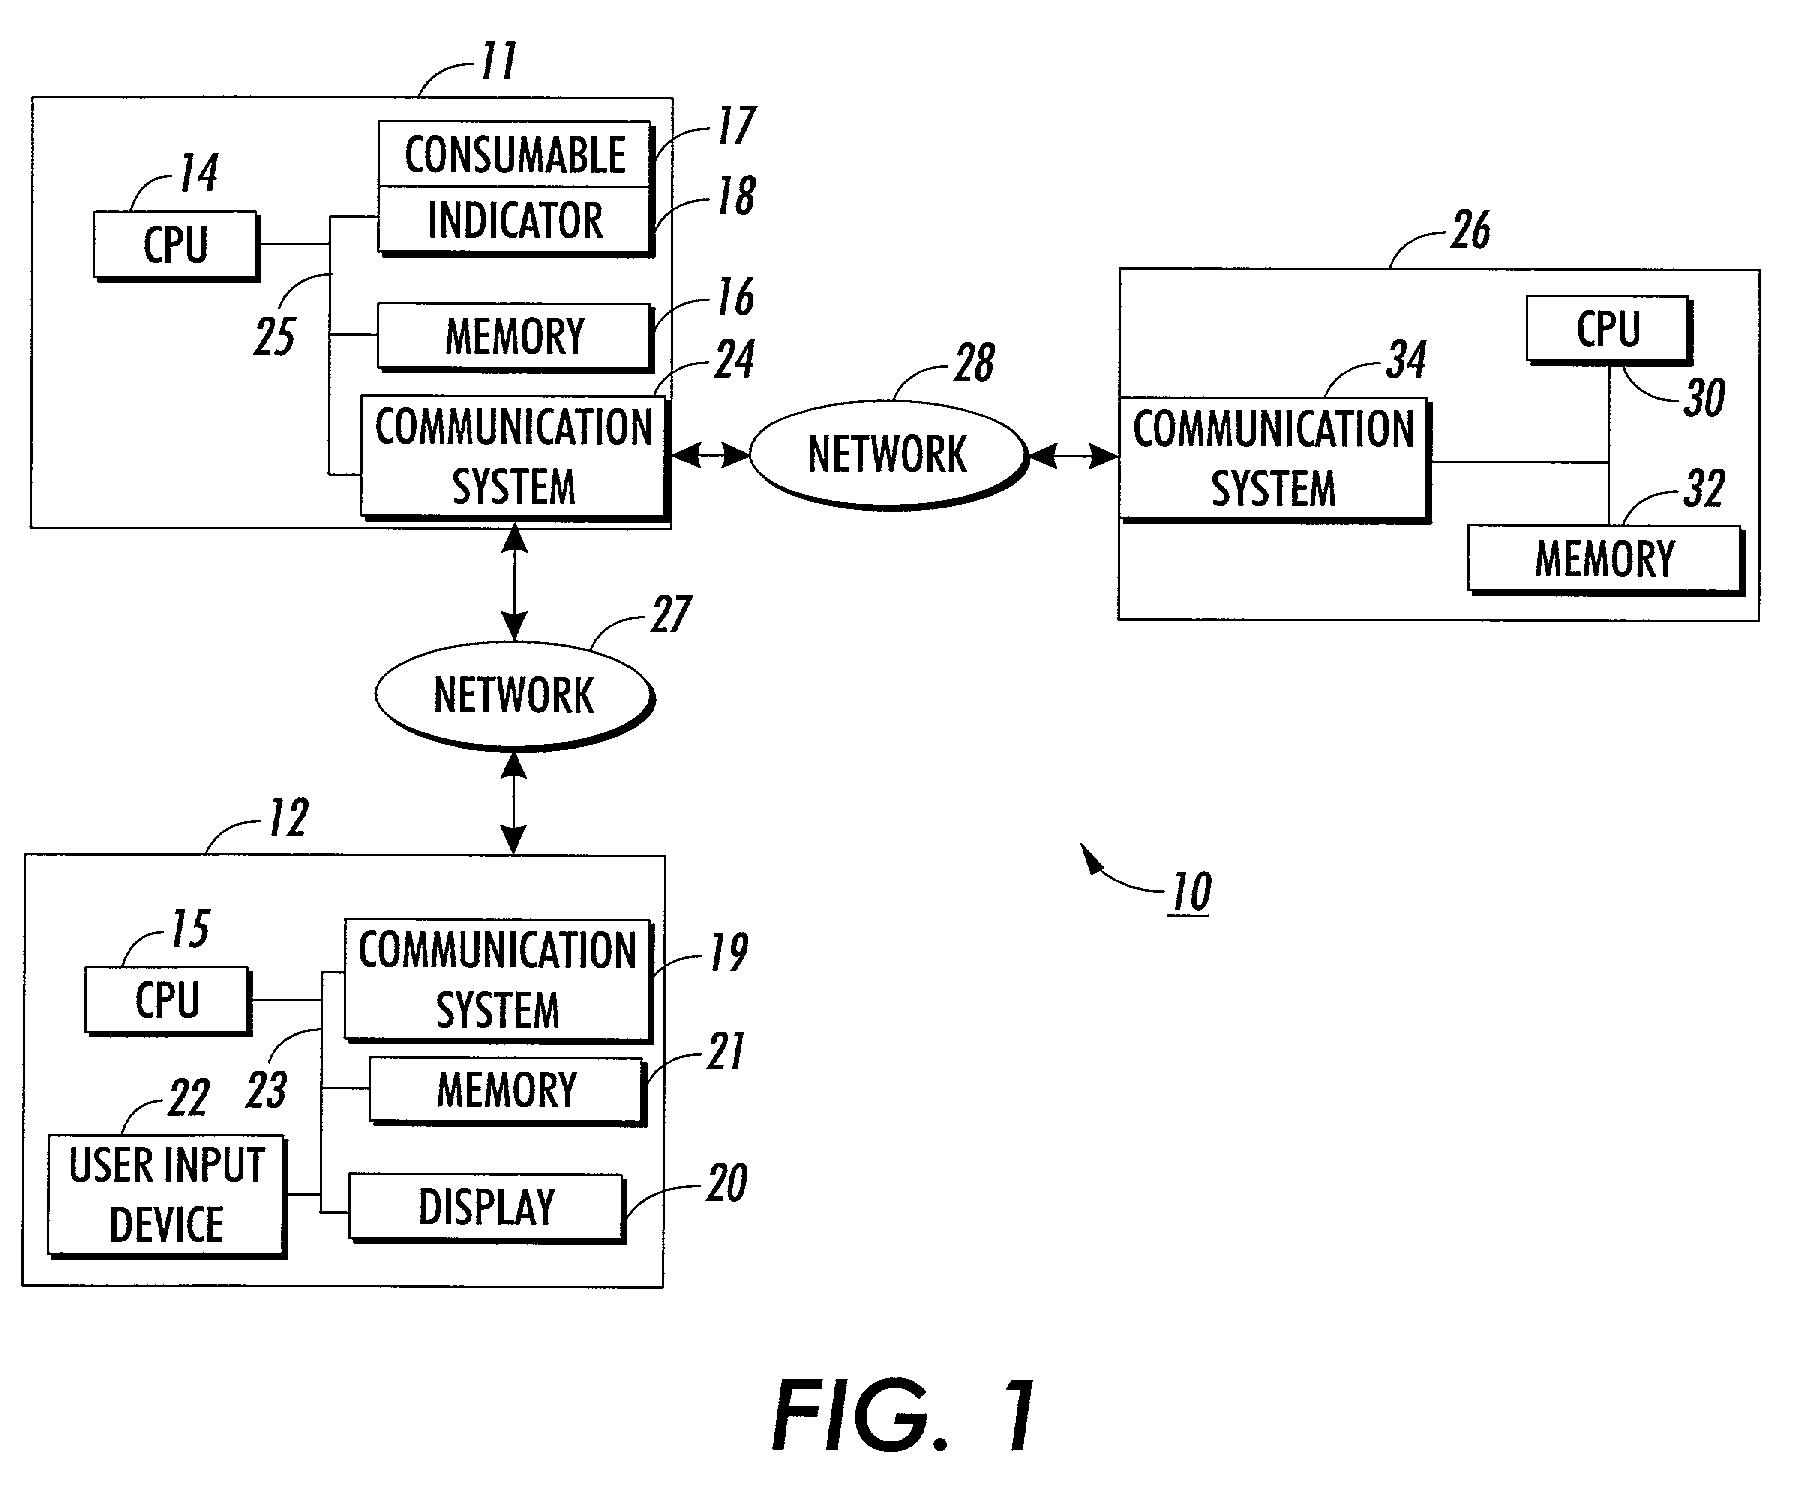 Method and system for ordering a consumable for a device